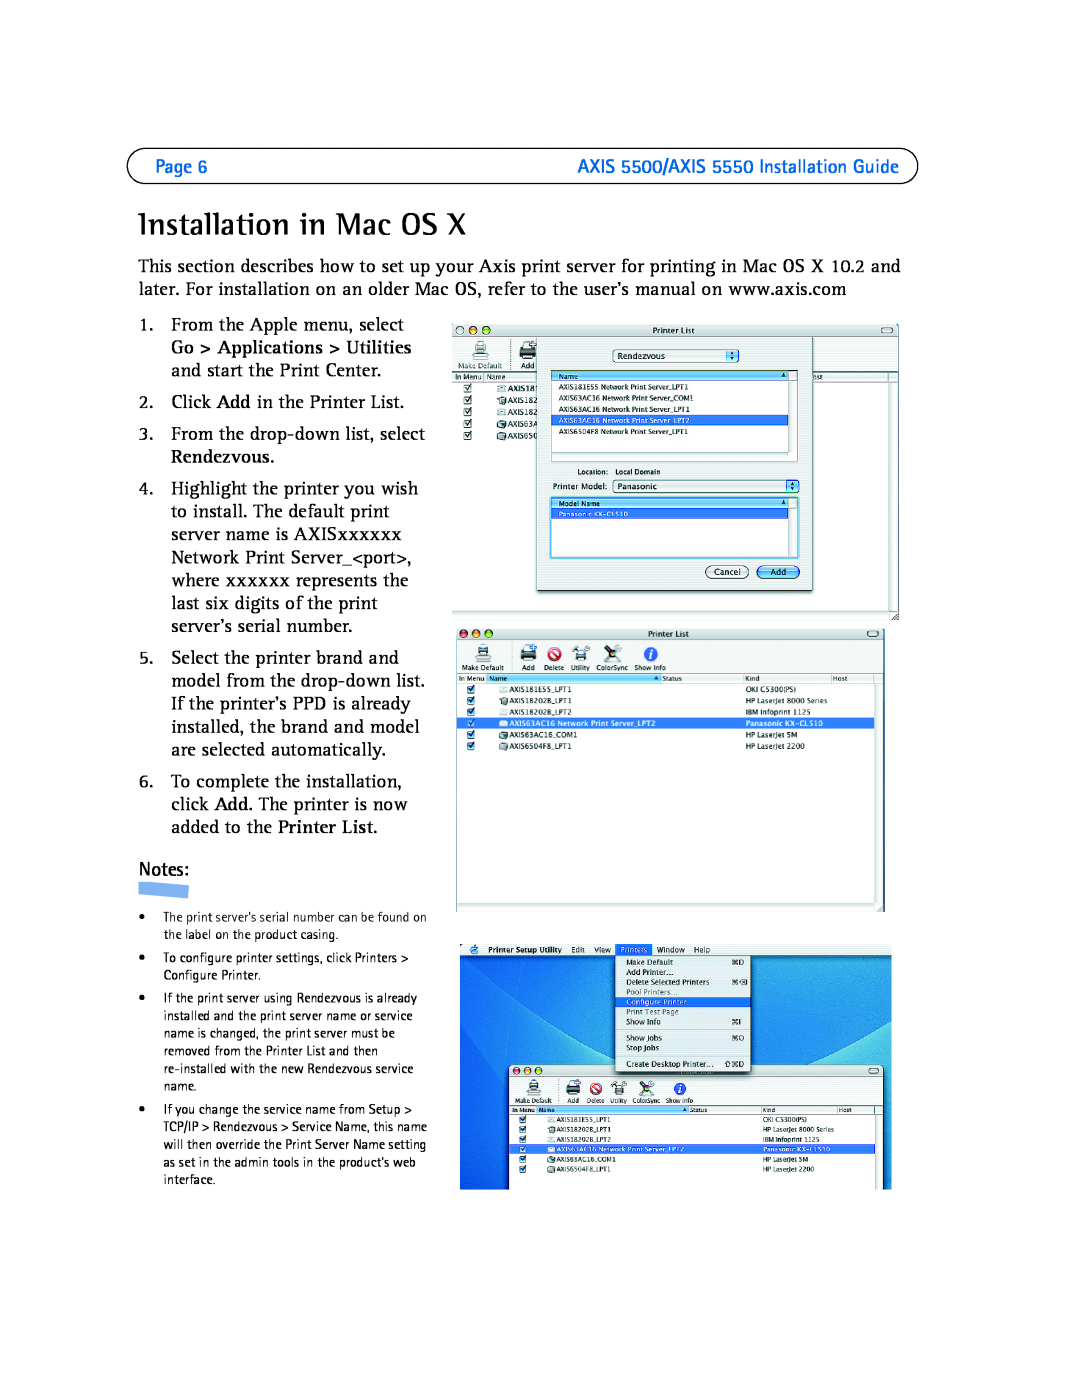 Axis Communications AXIS 5500, AXIS 5550 manual Installation in Mac OS, Page 